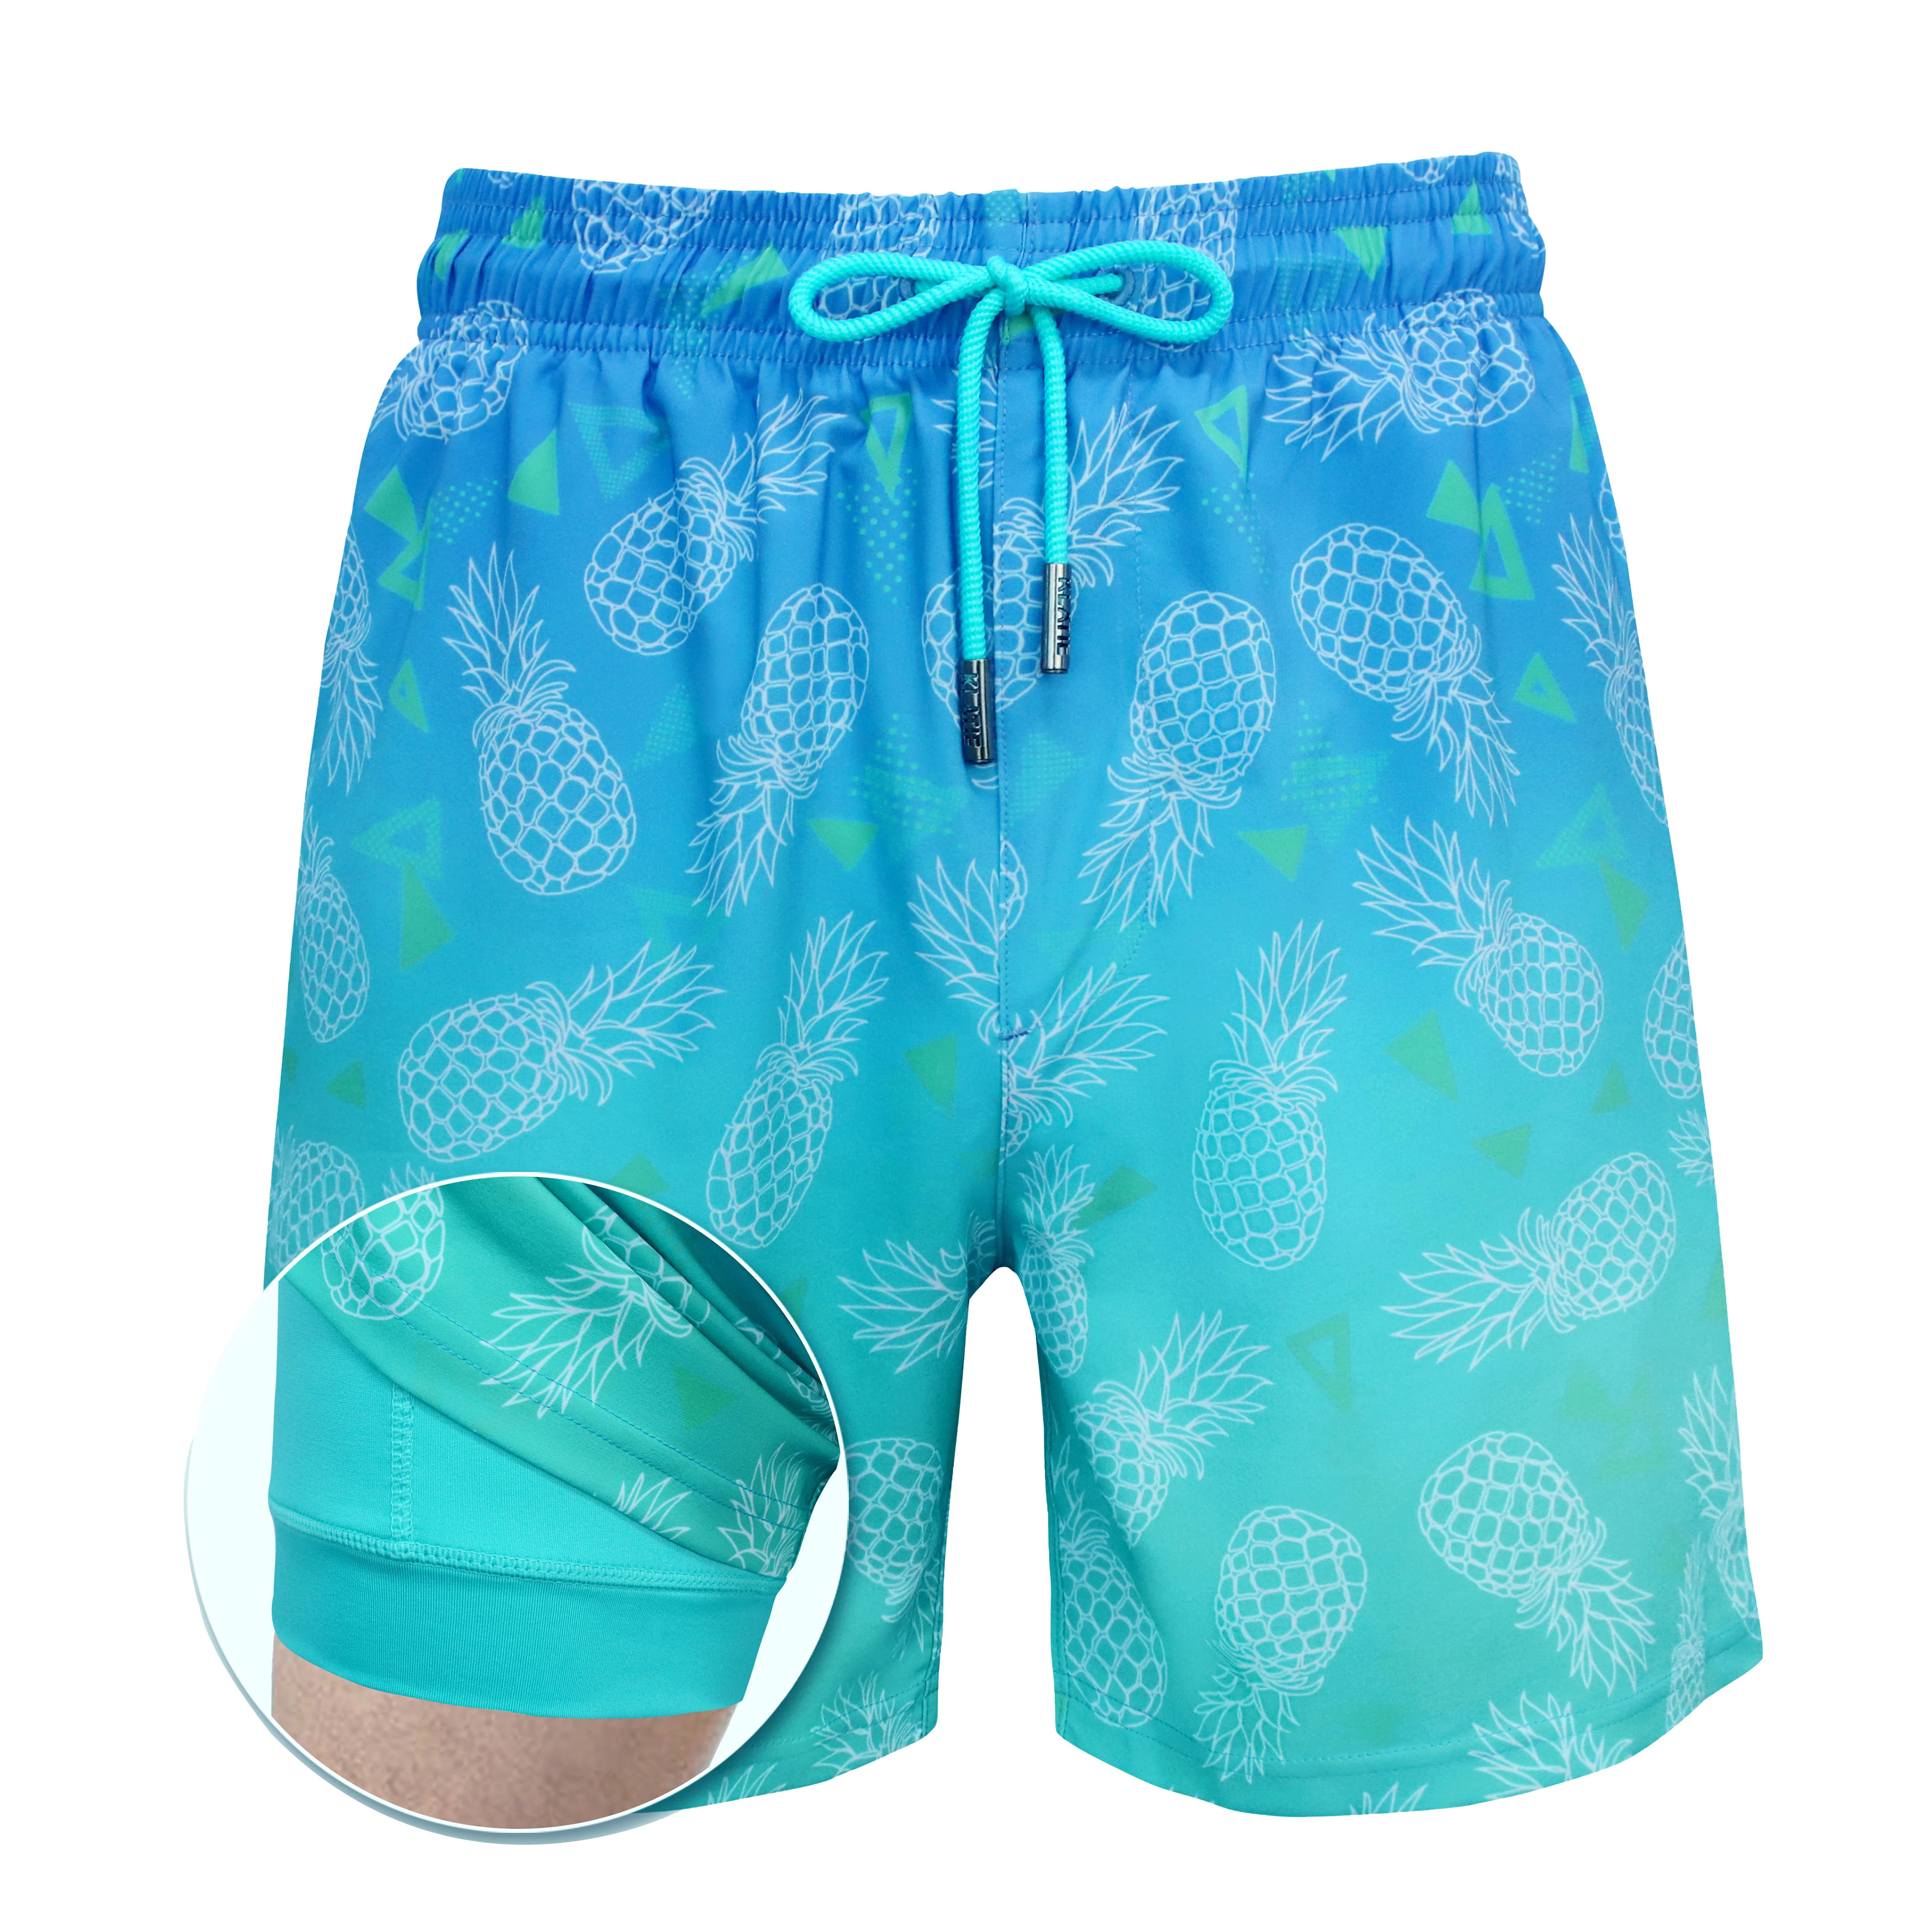 Fresh Pineapple (Compression Lined Swim Trunk)